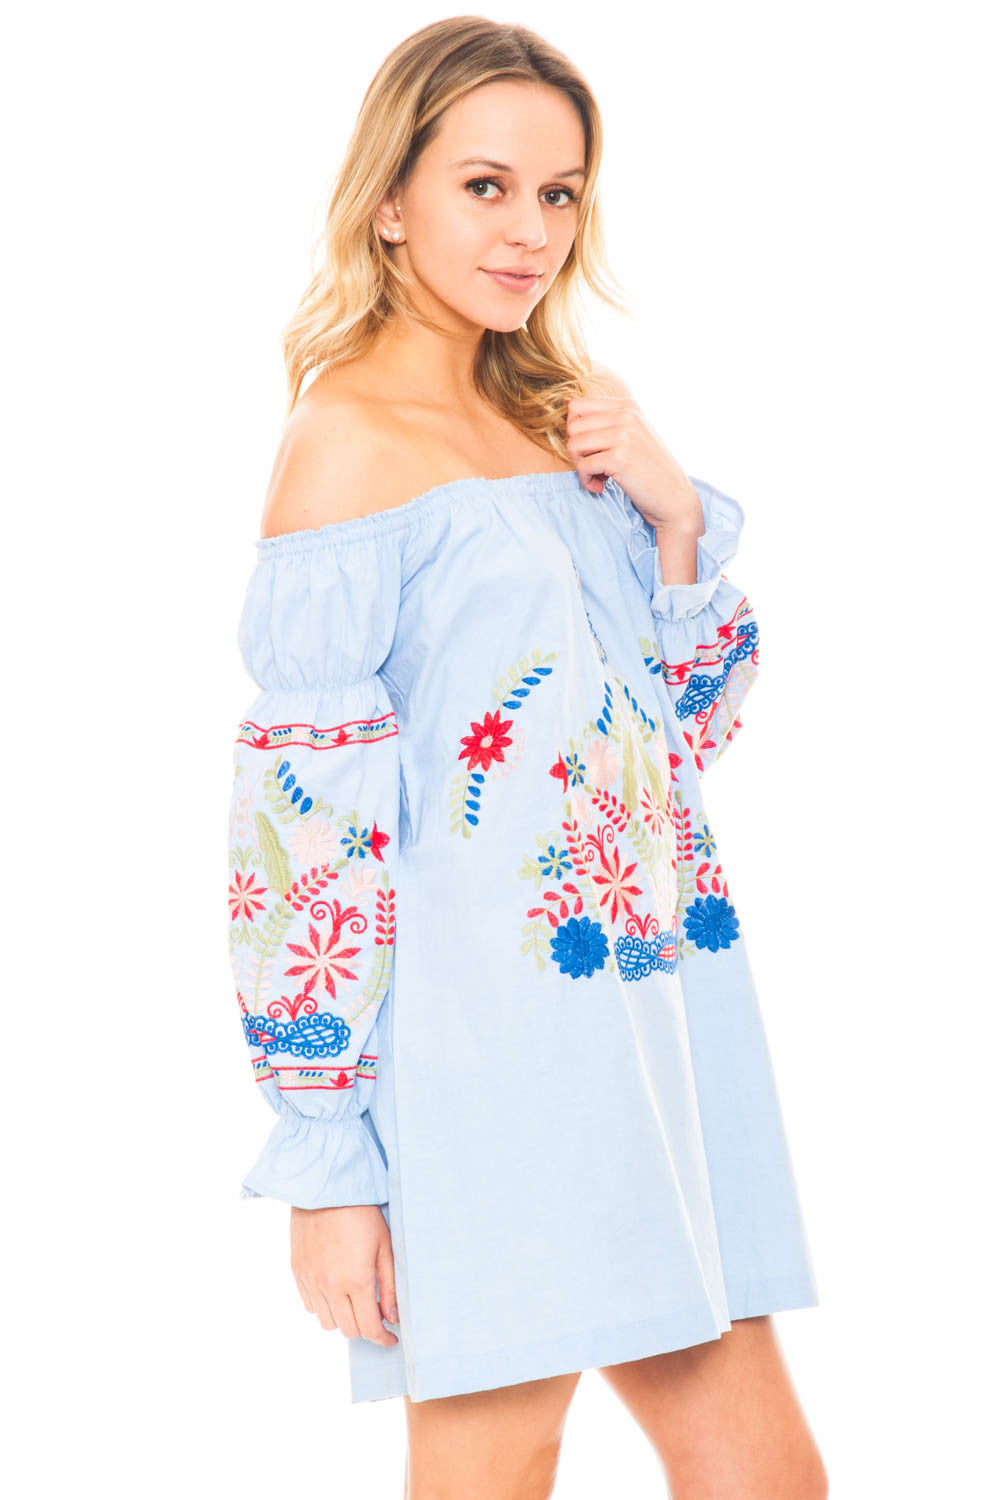 Dress - Off Shoulder Embroidered Dress with a Puffed Sleeve